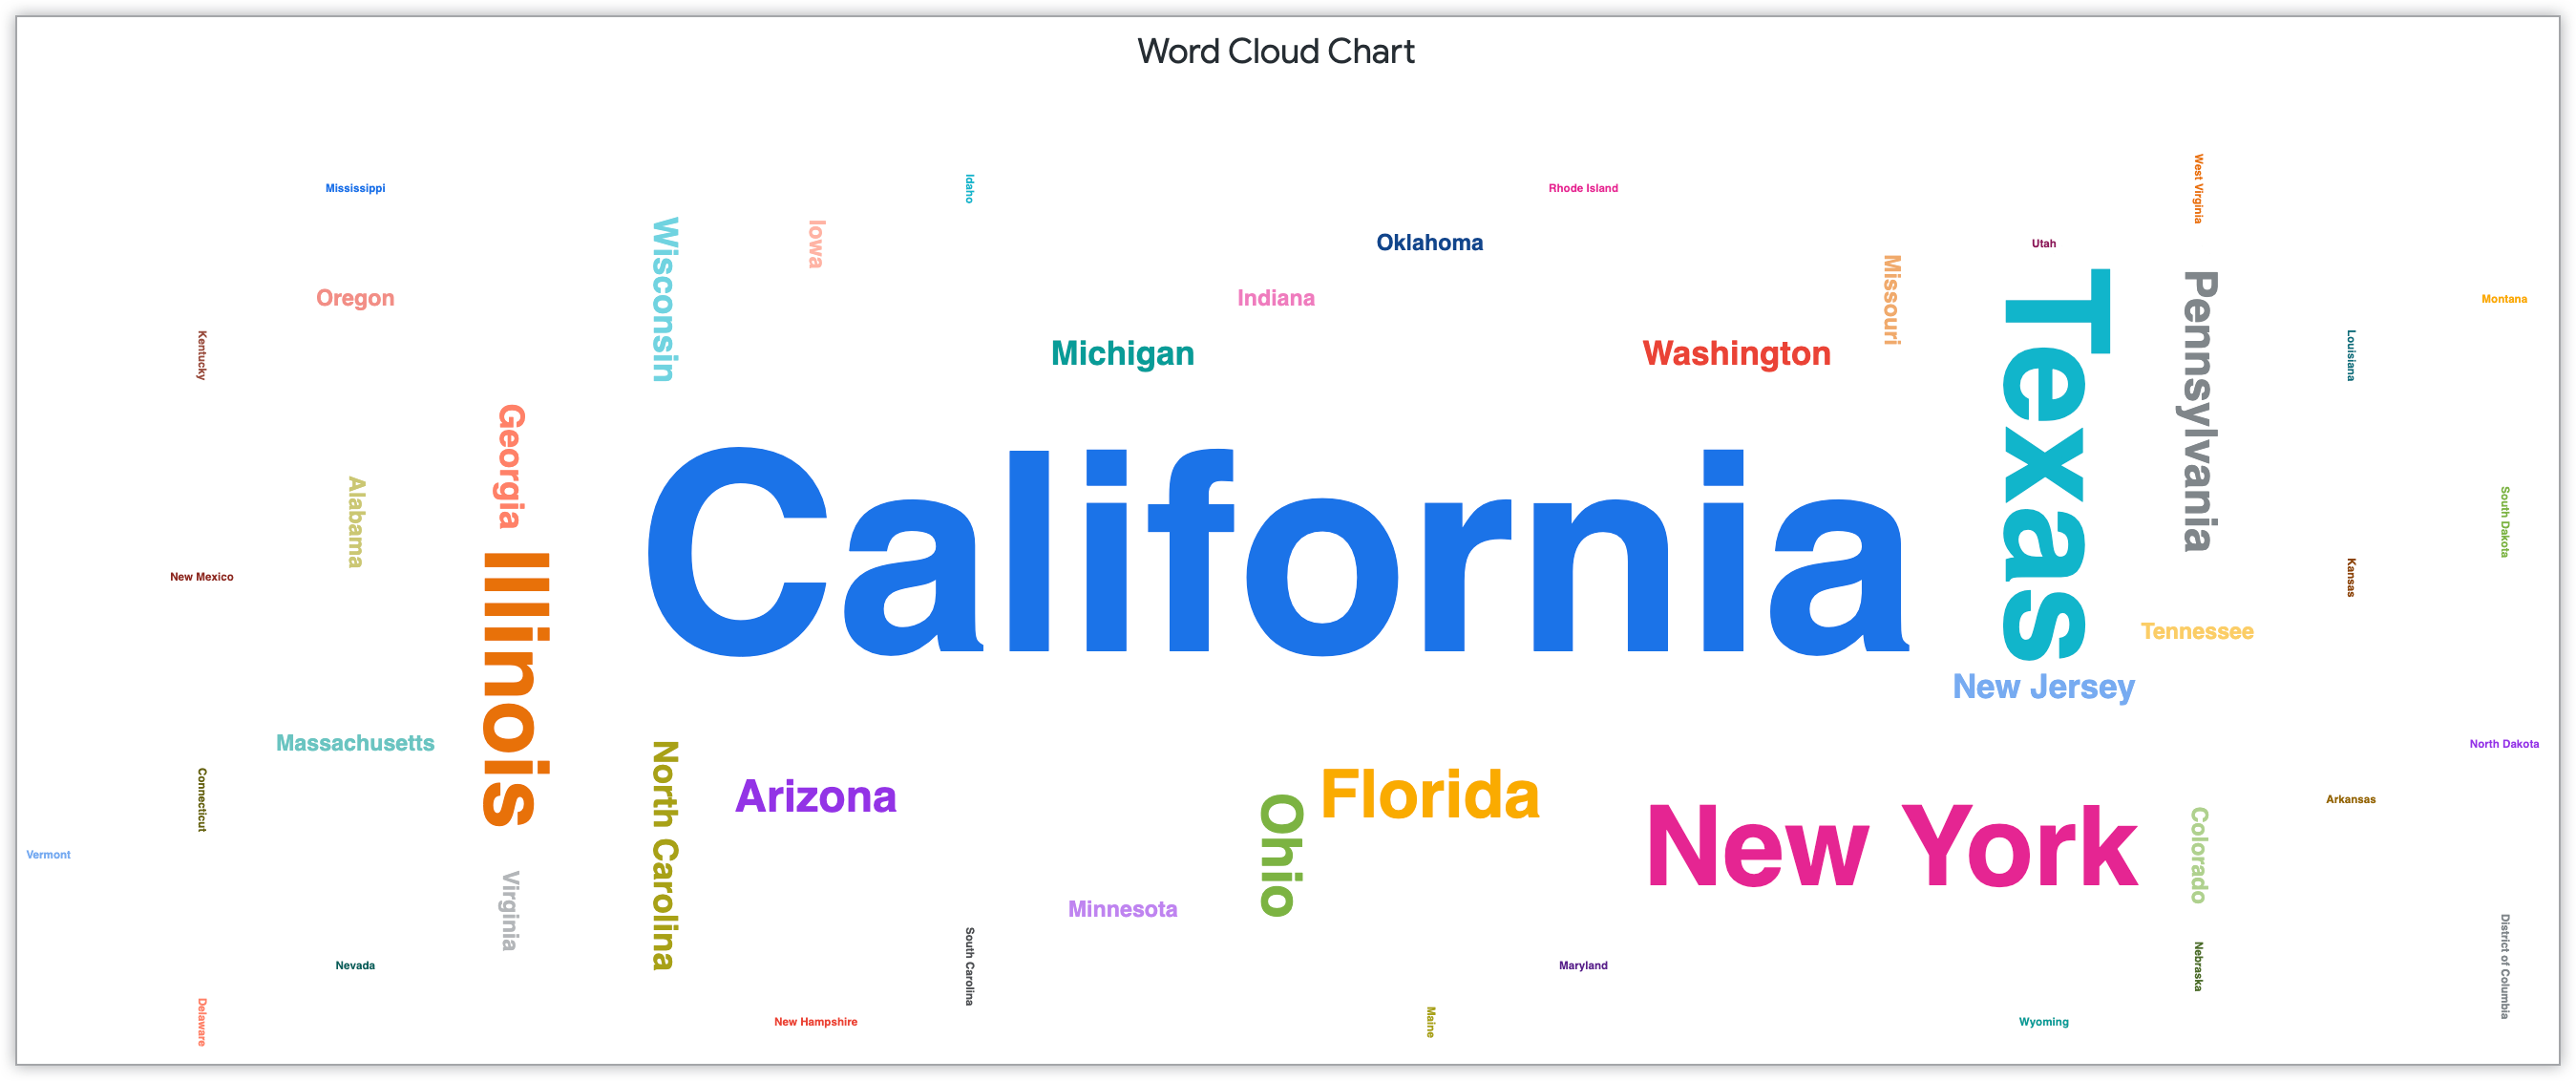 Word cloud chart showing state names sized by the number of customers in that state.